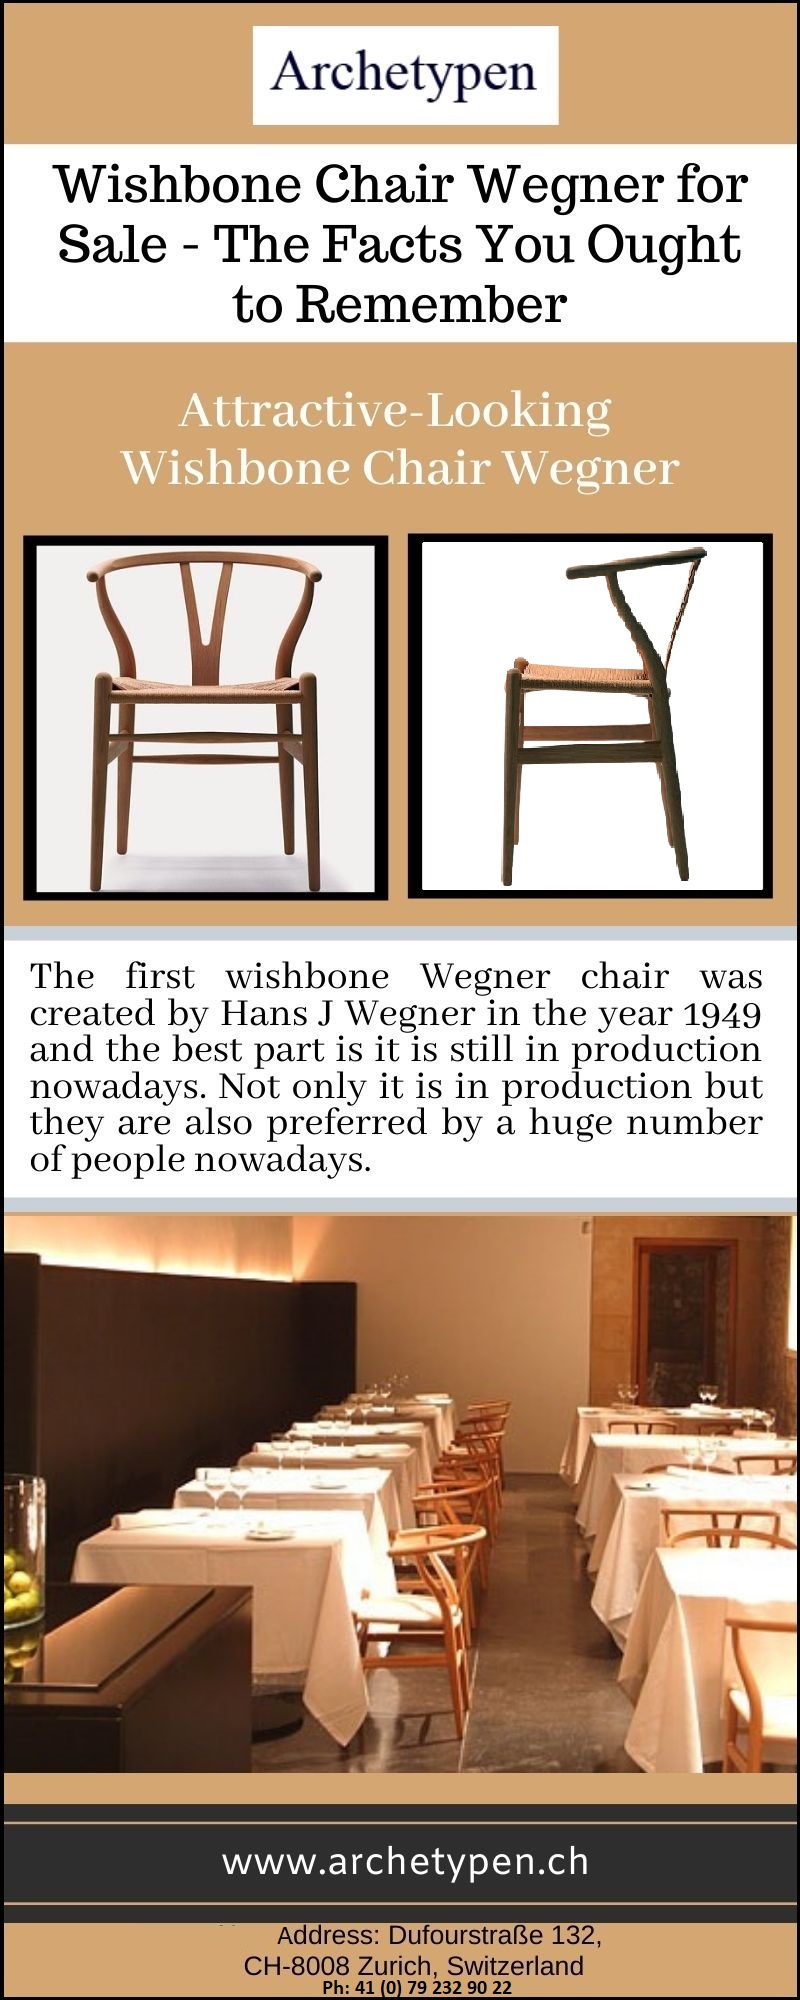 High Quality Wishbone Chair Wegner for Sale – The Facts You Ought To Remember Blank Meme Template